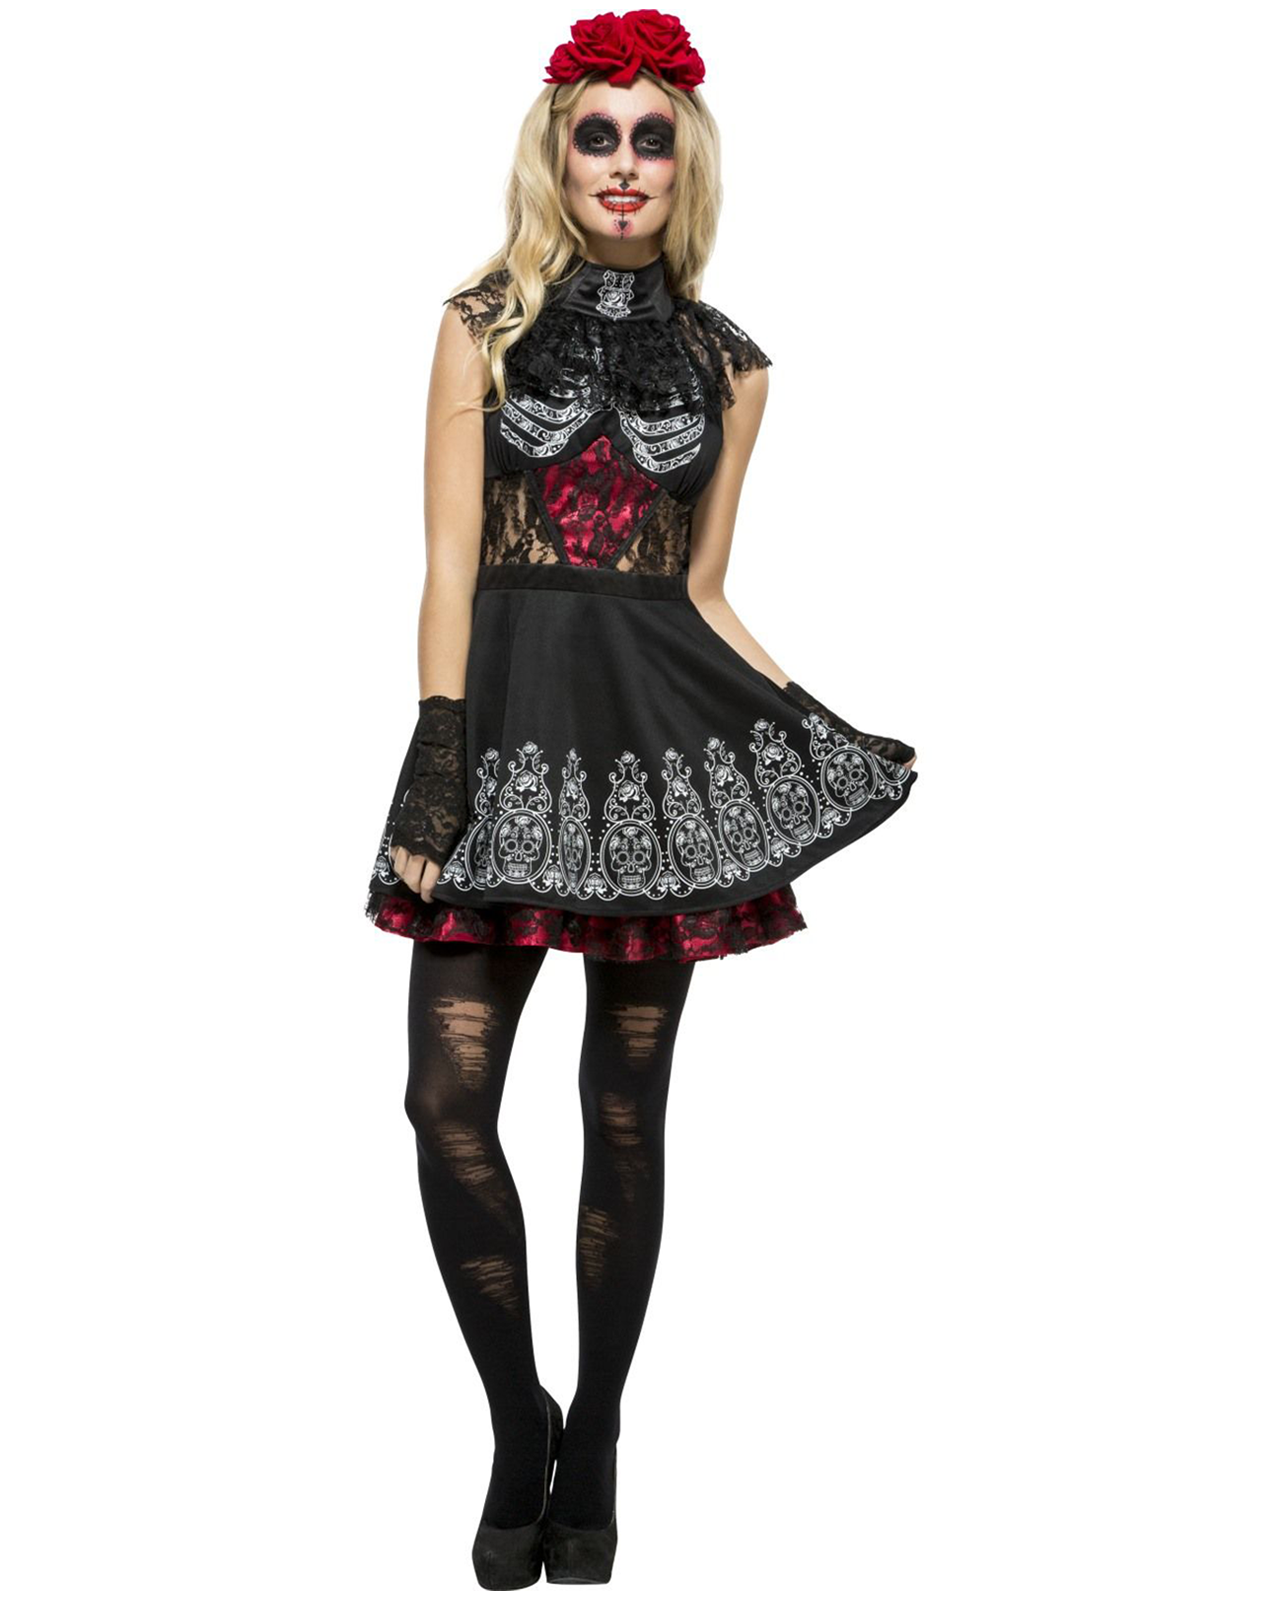 Fever Day of the Dead Dress Costume